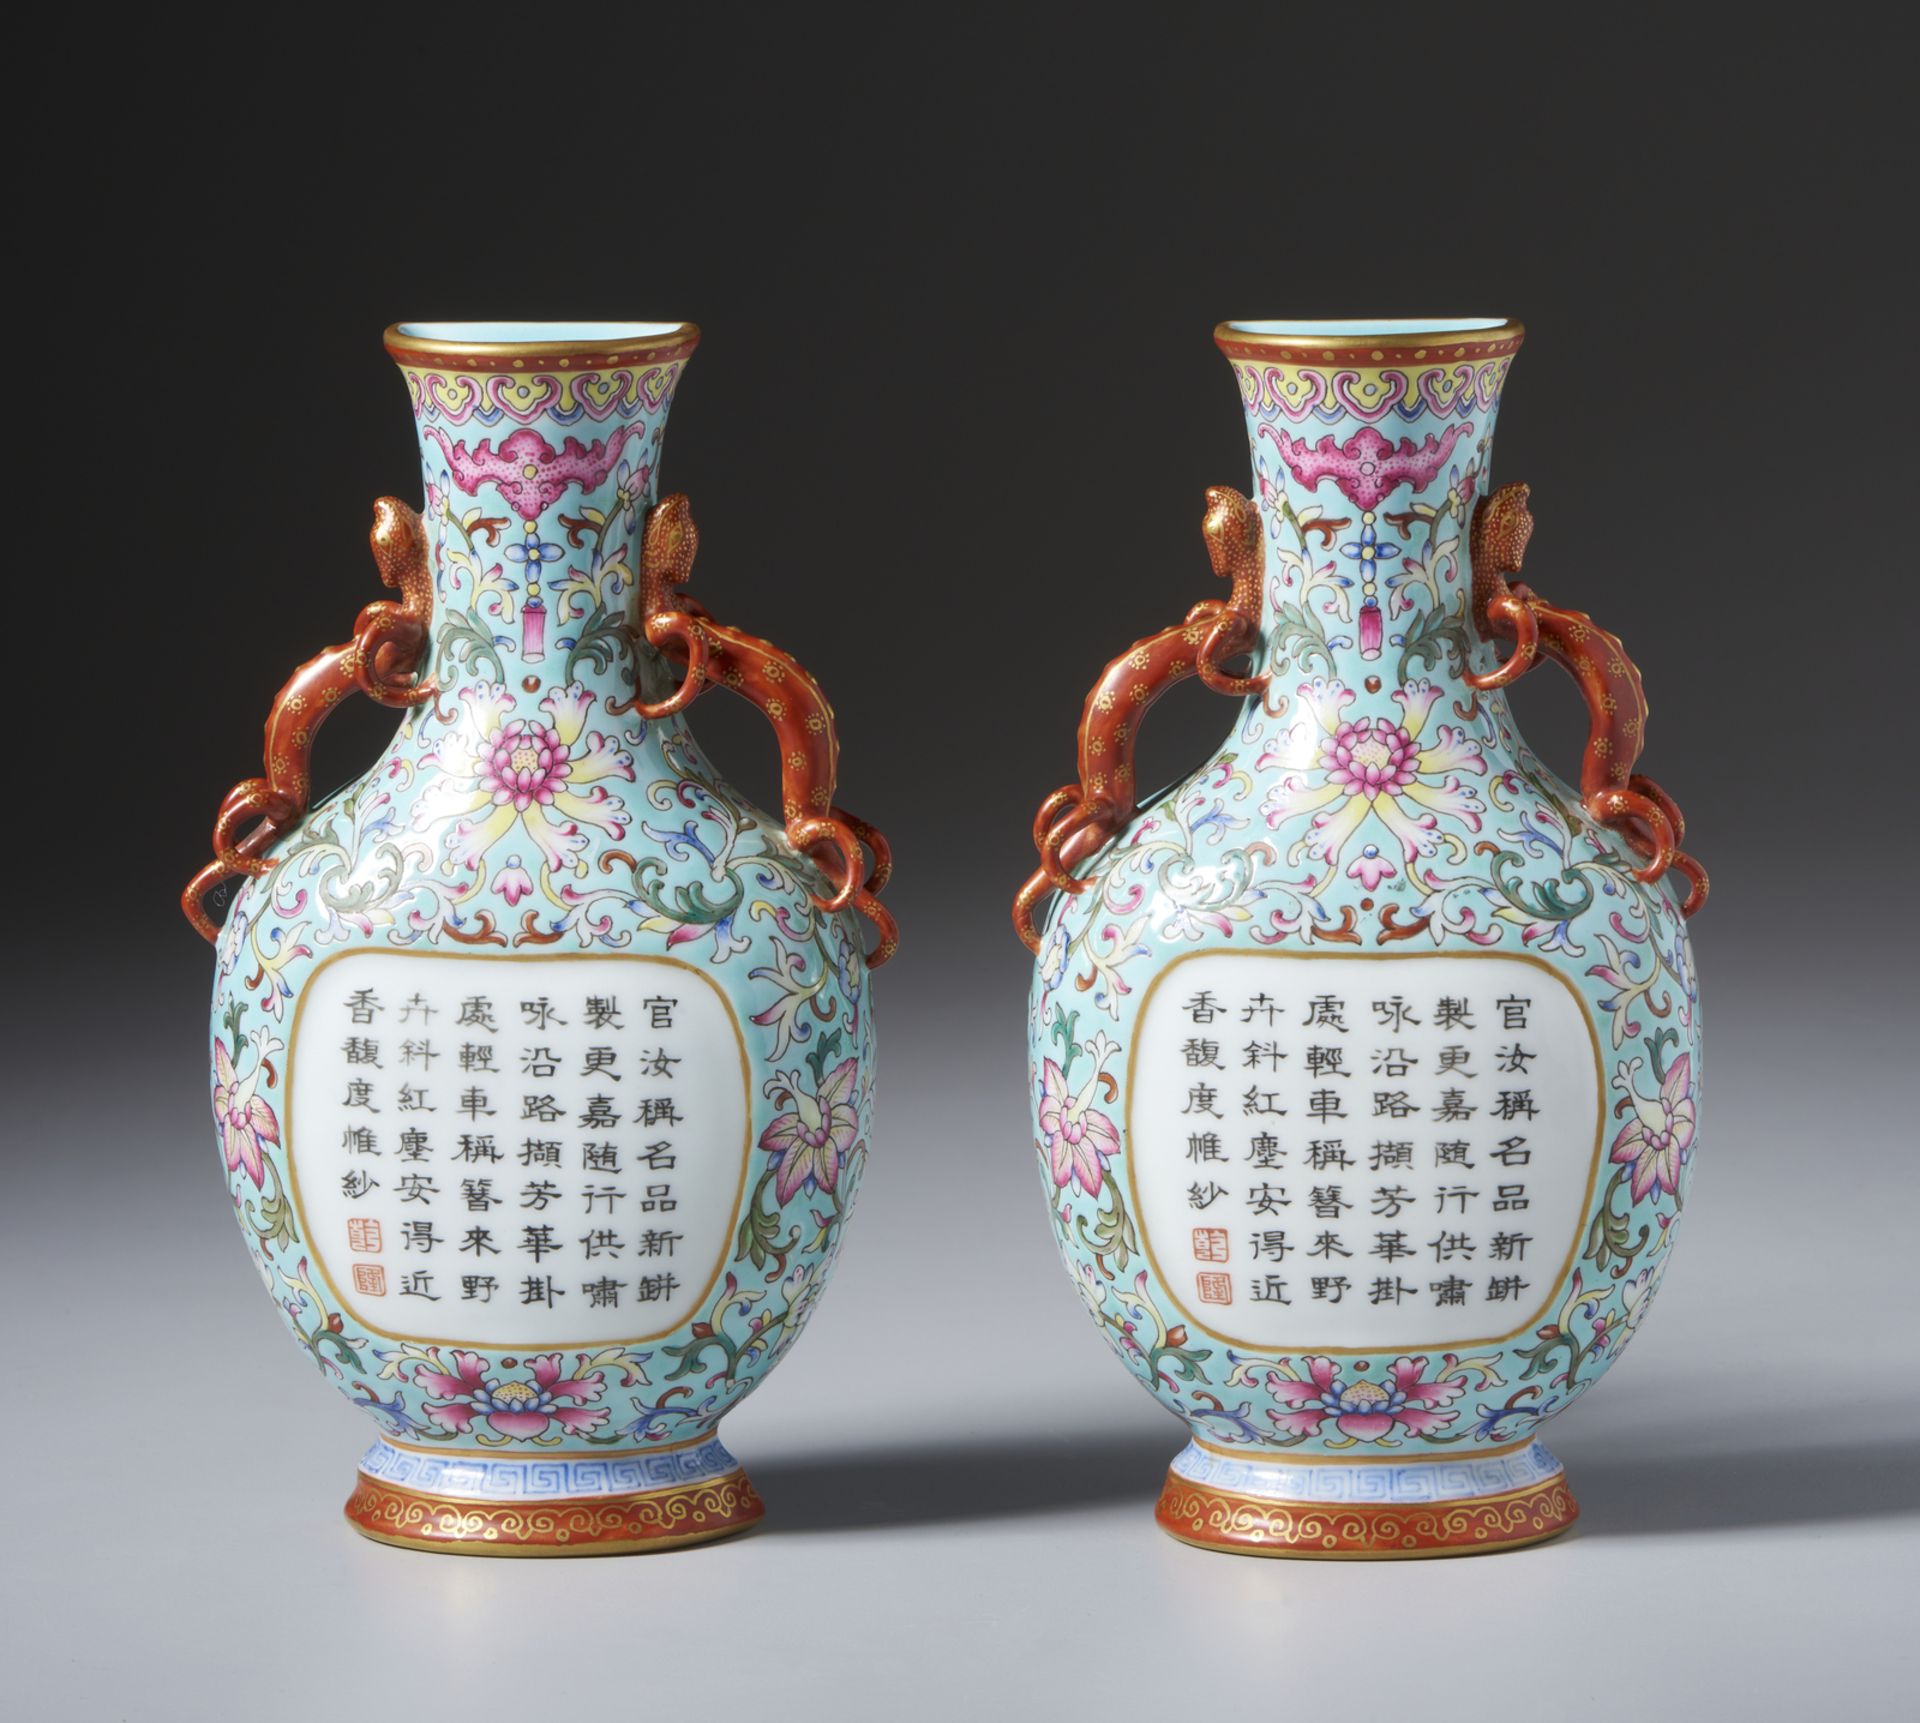 A pair of wall porcelain balauster vases with Qilong-shaped handles and central white reserve with